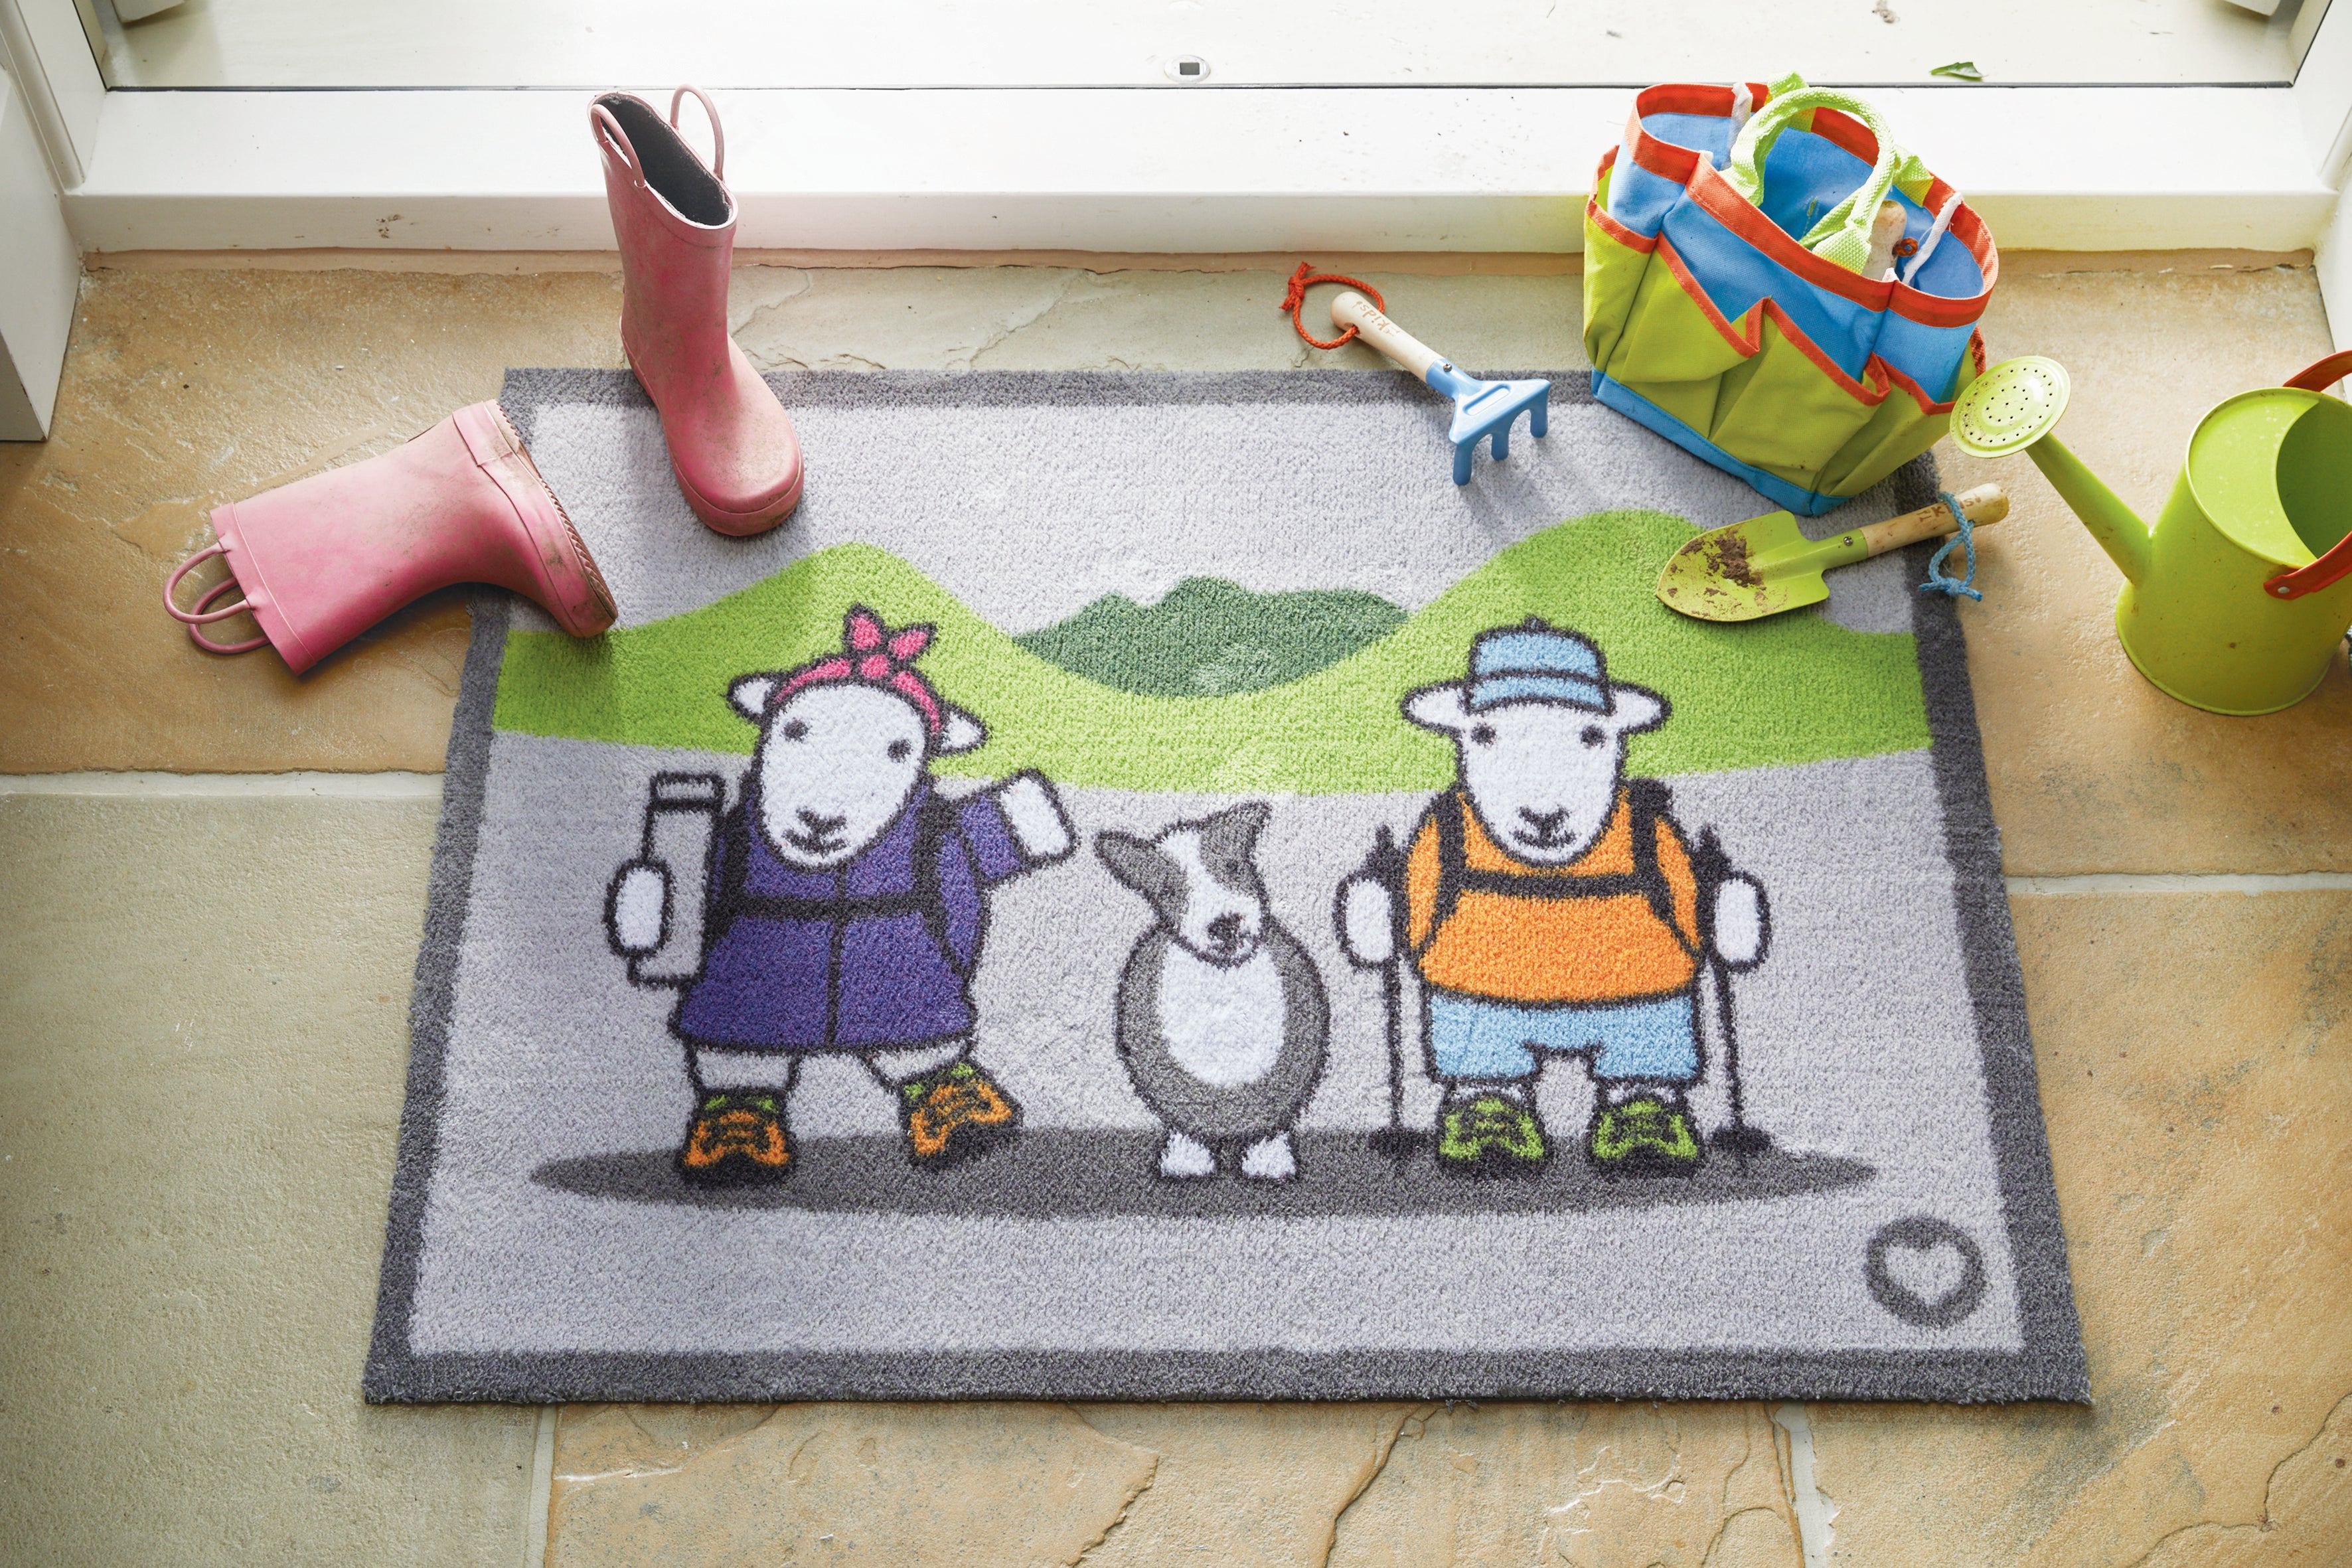 Herdy Hiker rug with boots and outdoor tools on top